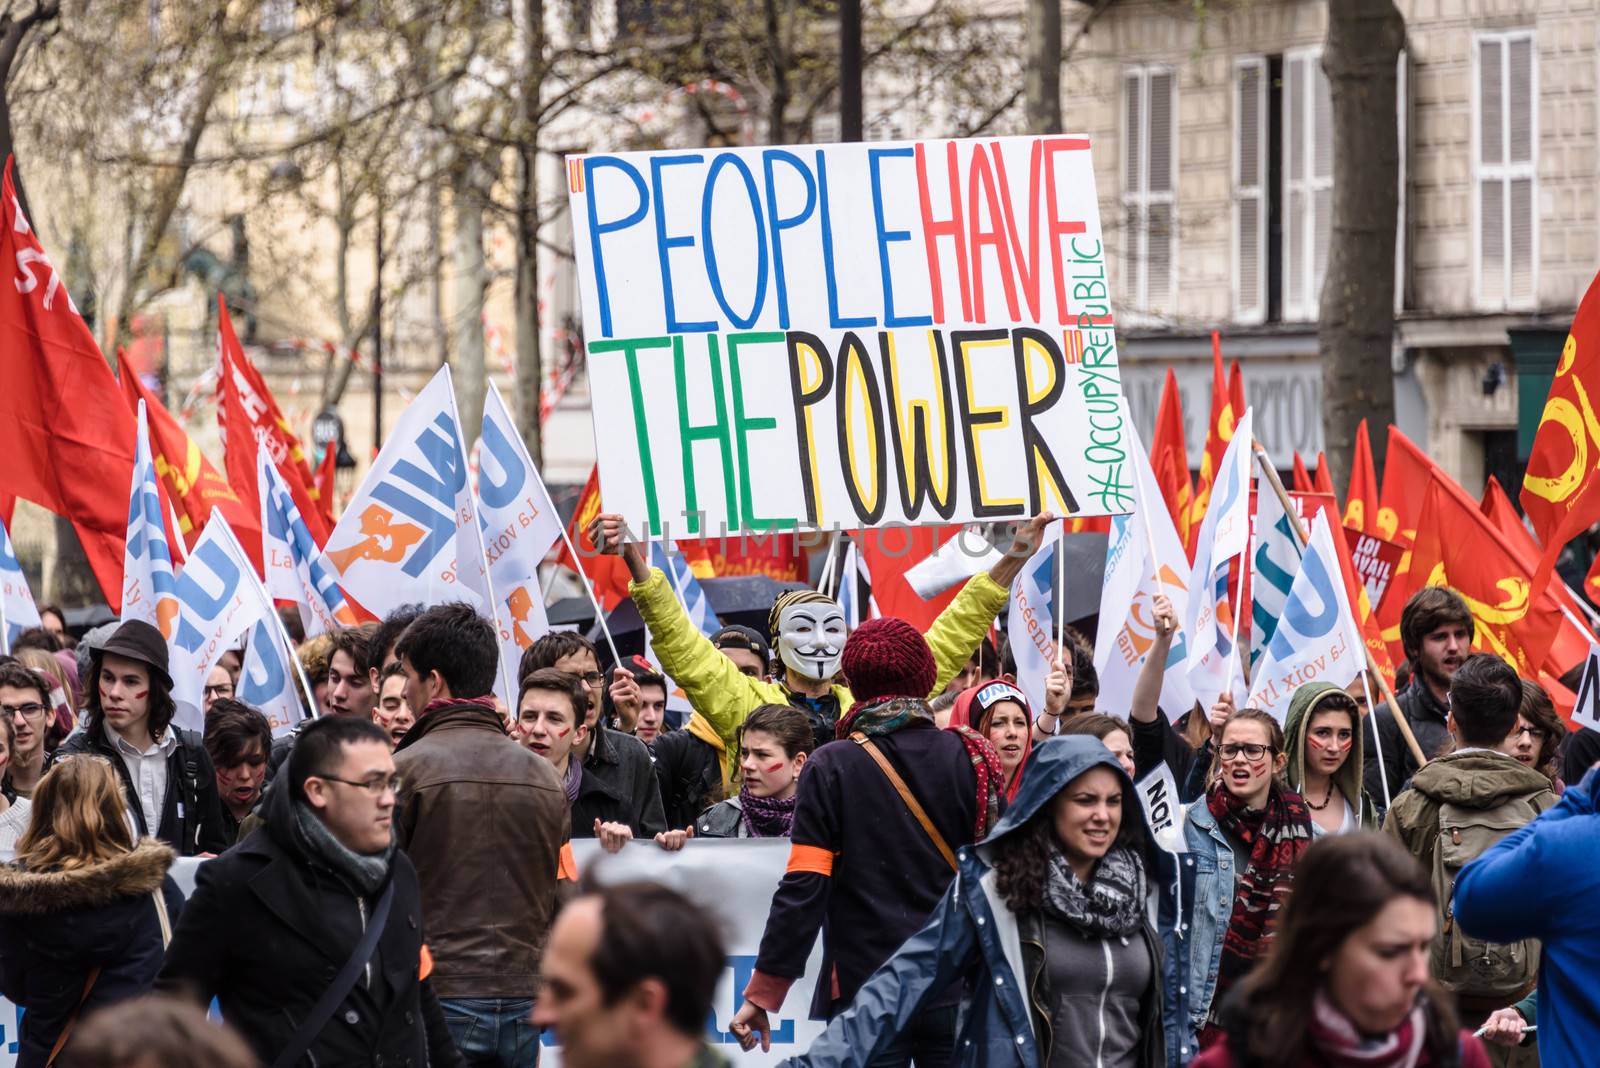 FRANCE, Paris: A demonstrator holds a sign which reads People have the power during a protest on April 9, 2016 in Paris, against the French government's proposed labour law reforms.